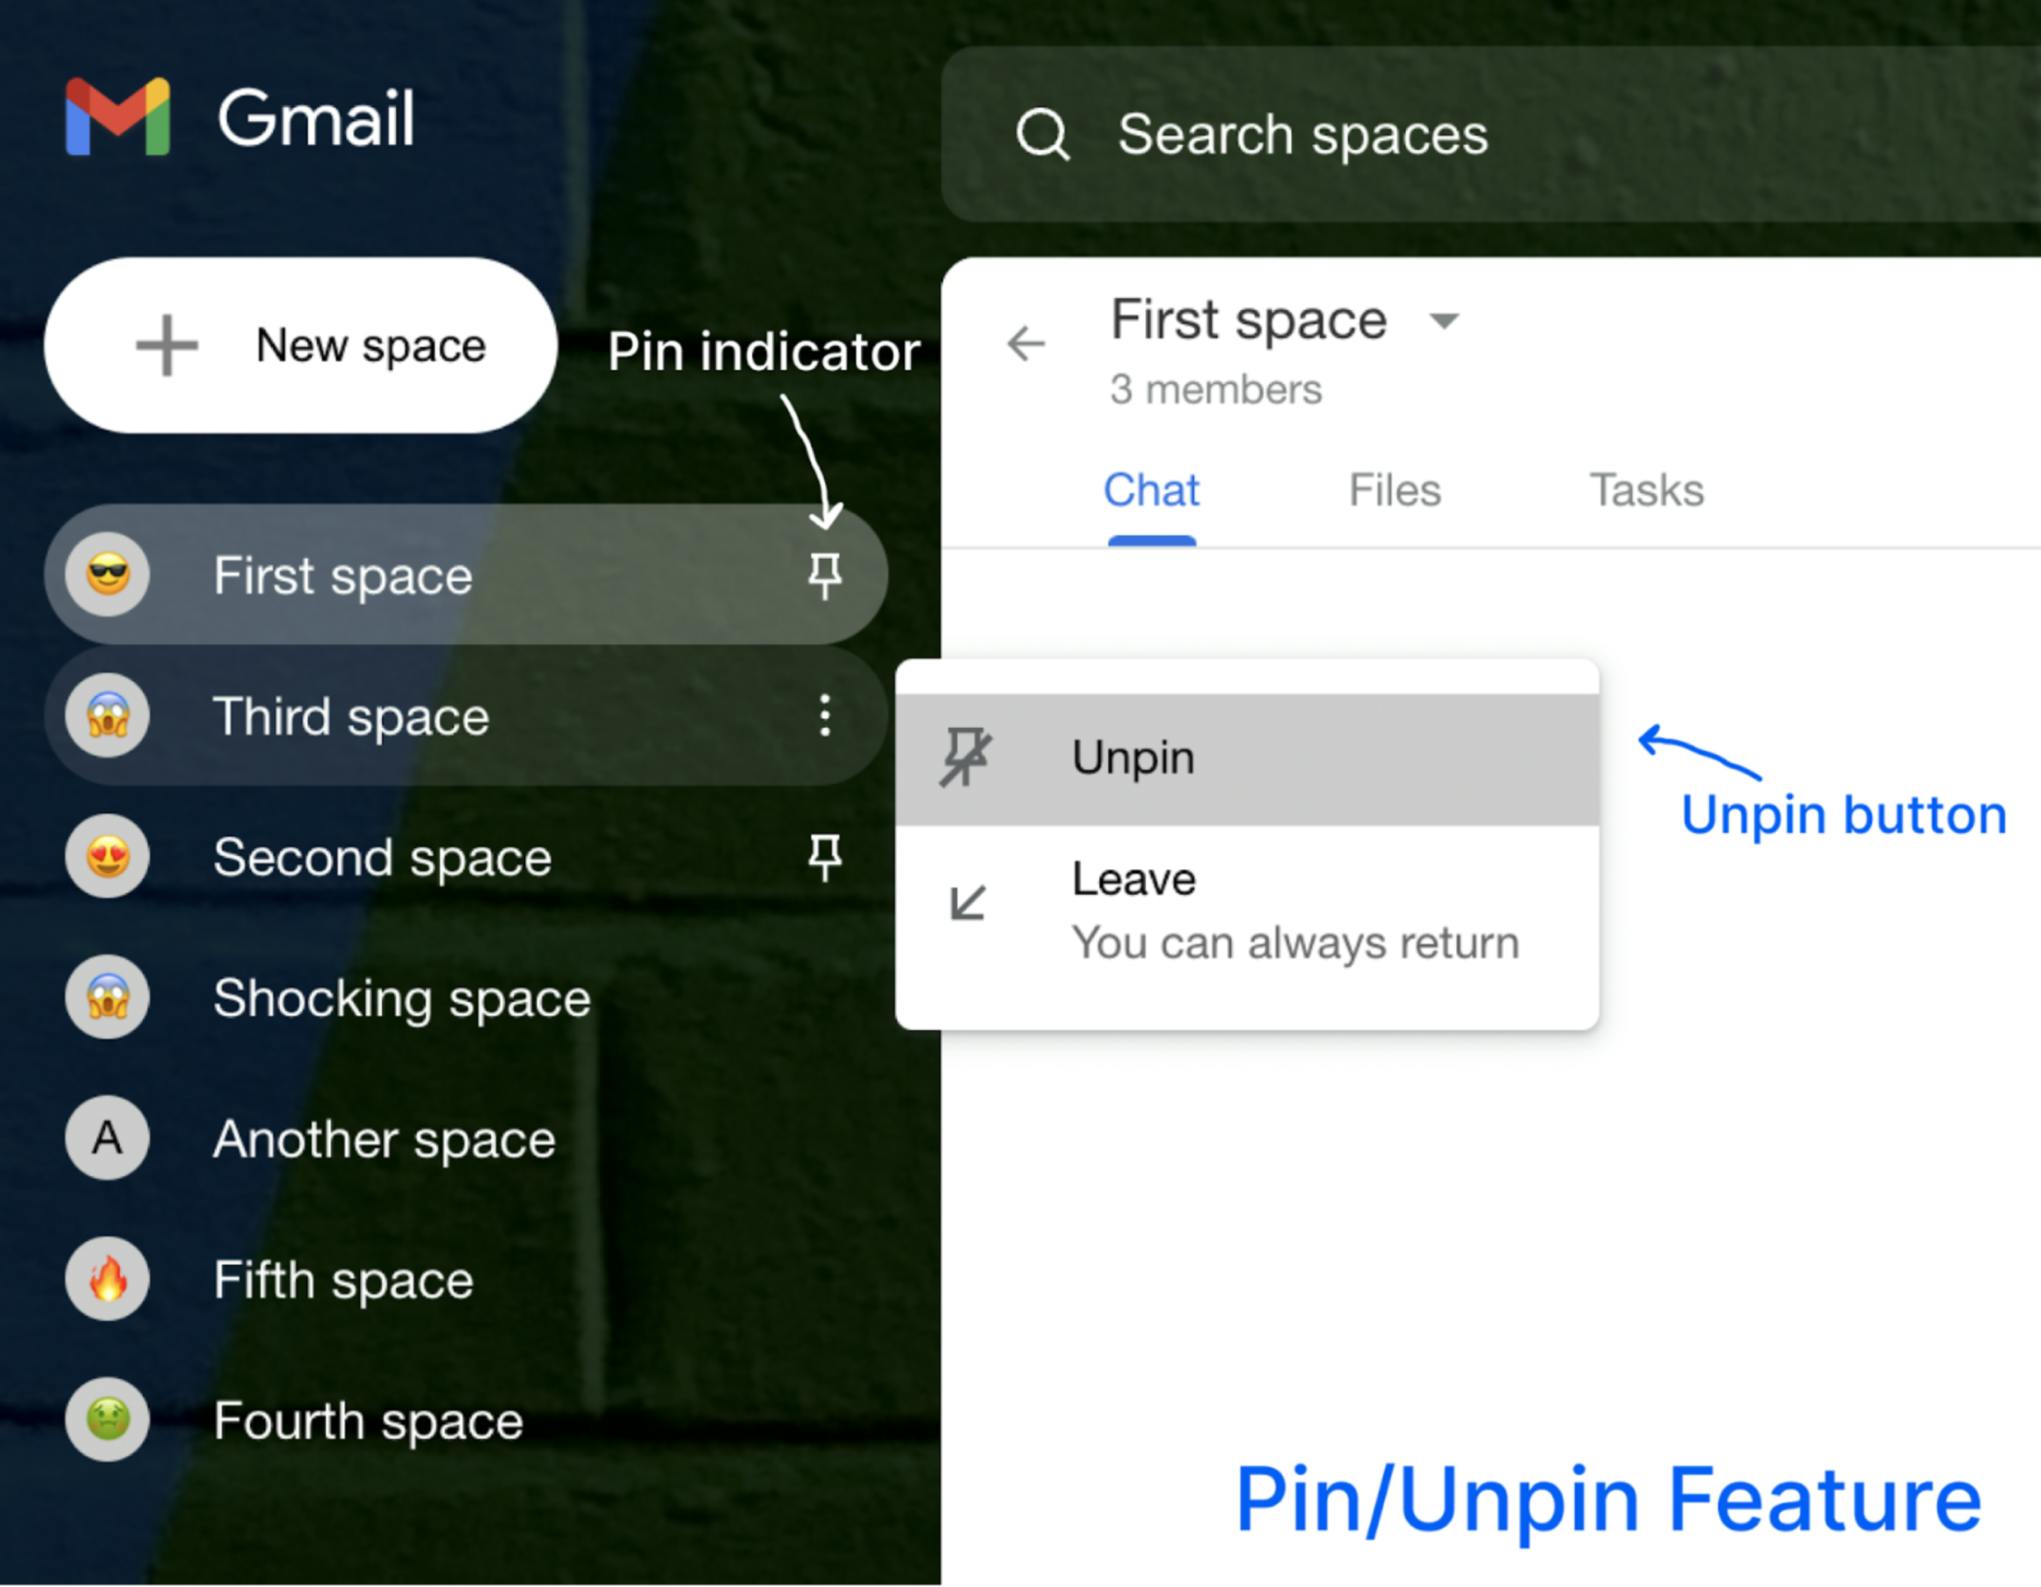 Pin and Unpin functionality that the reader will build